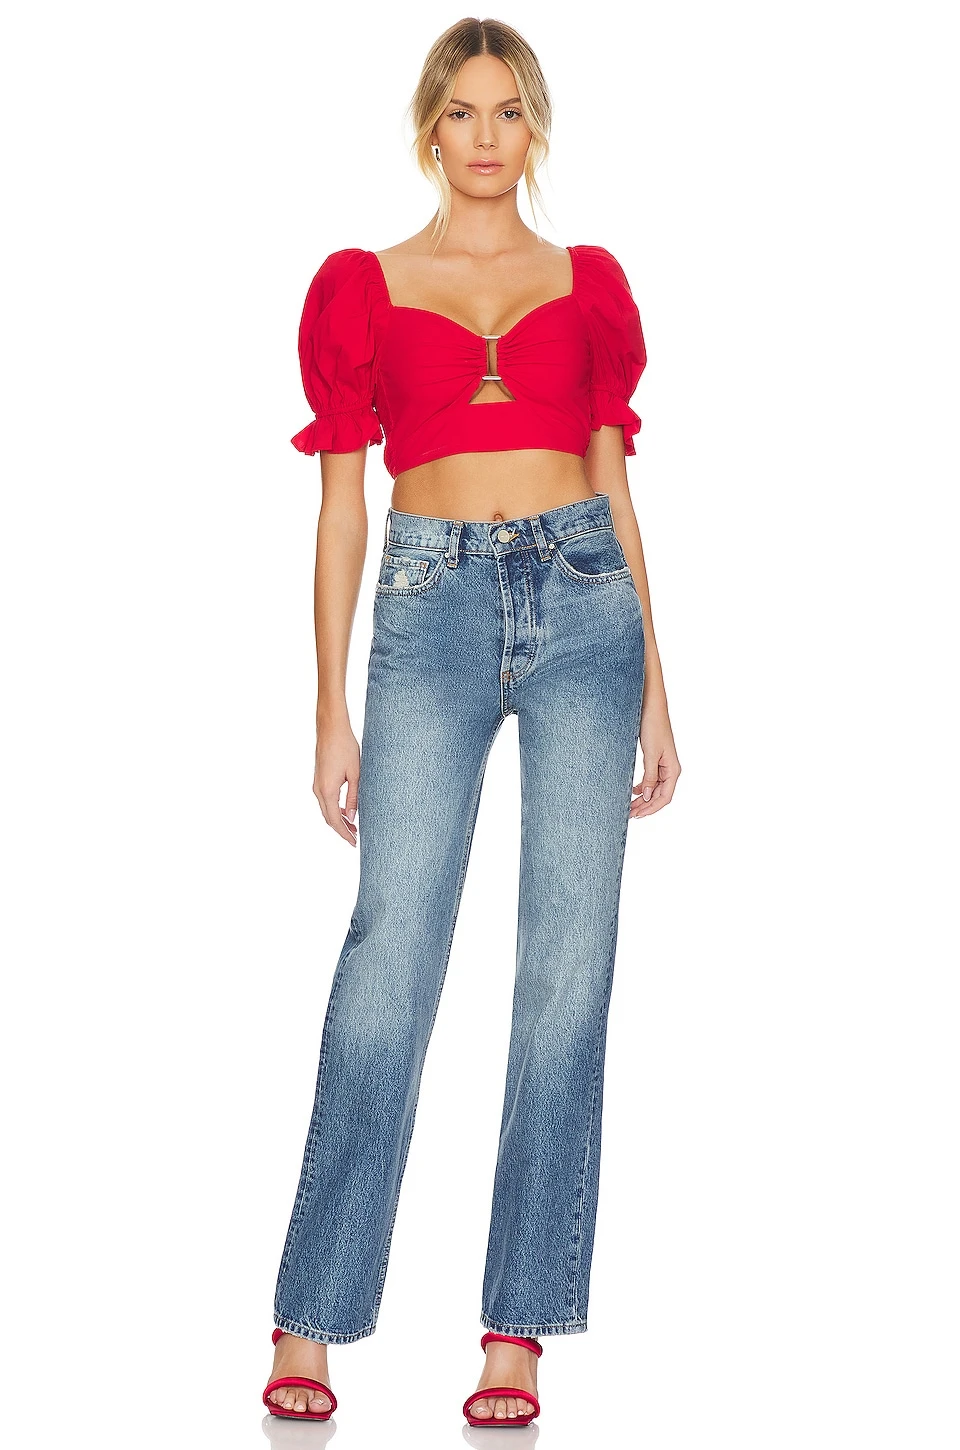 More to Come Elizabeth Puff Sleeve Top RED